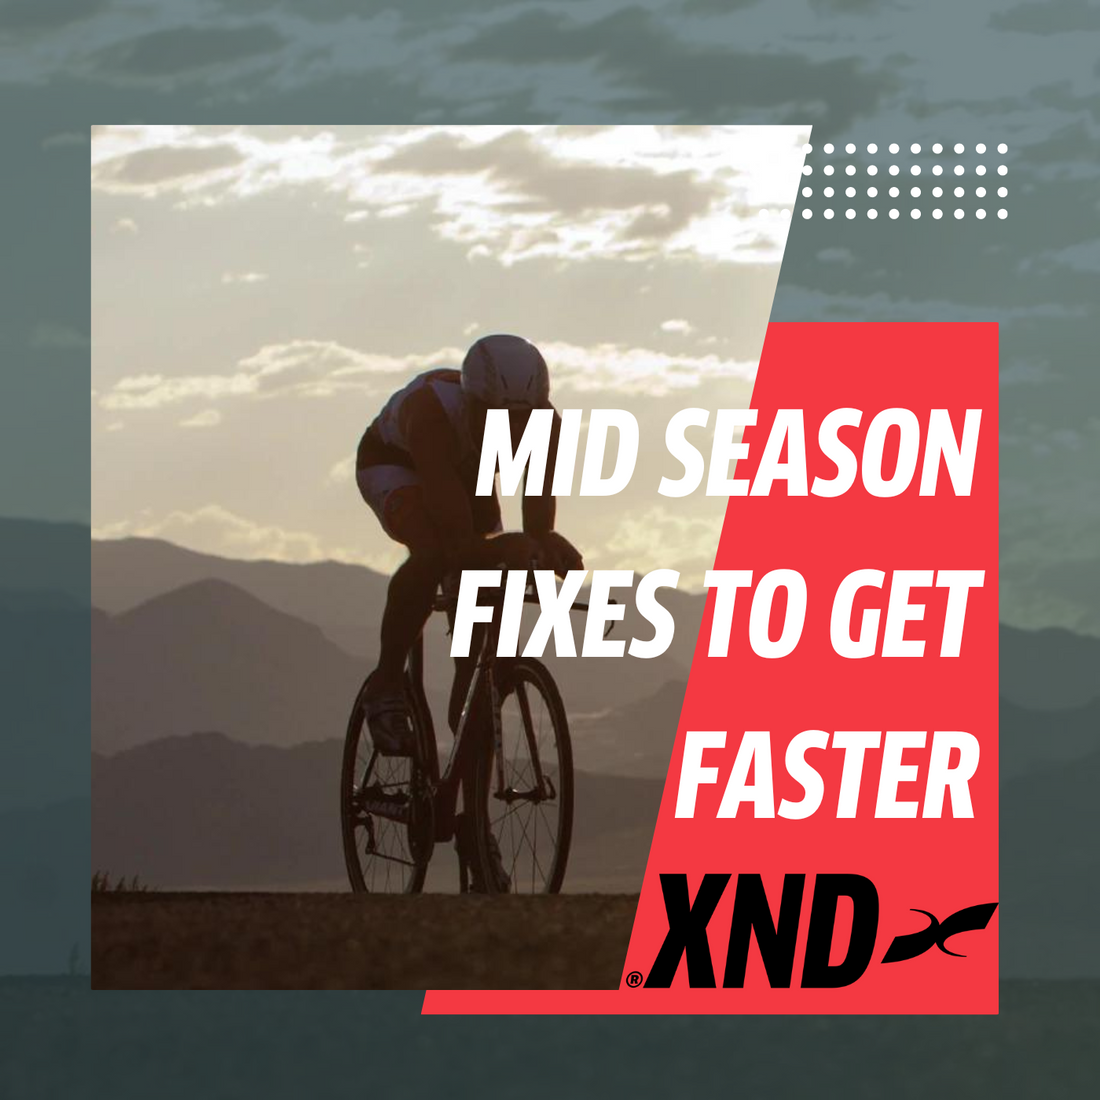 Mid-season fixes to get faster